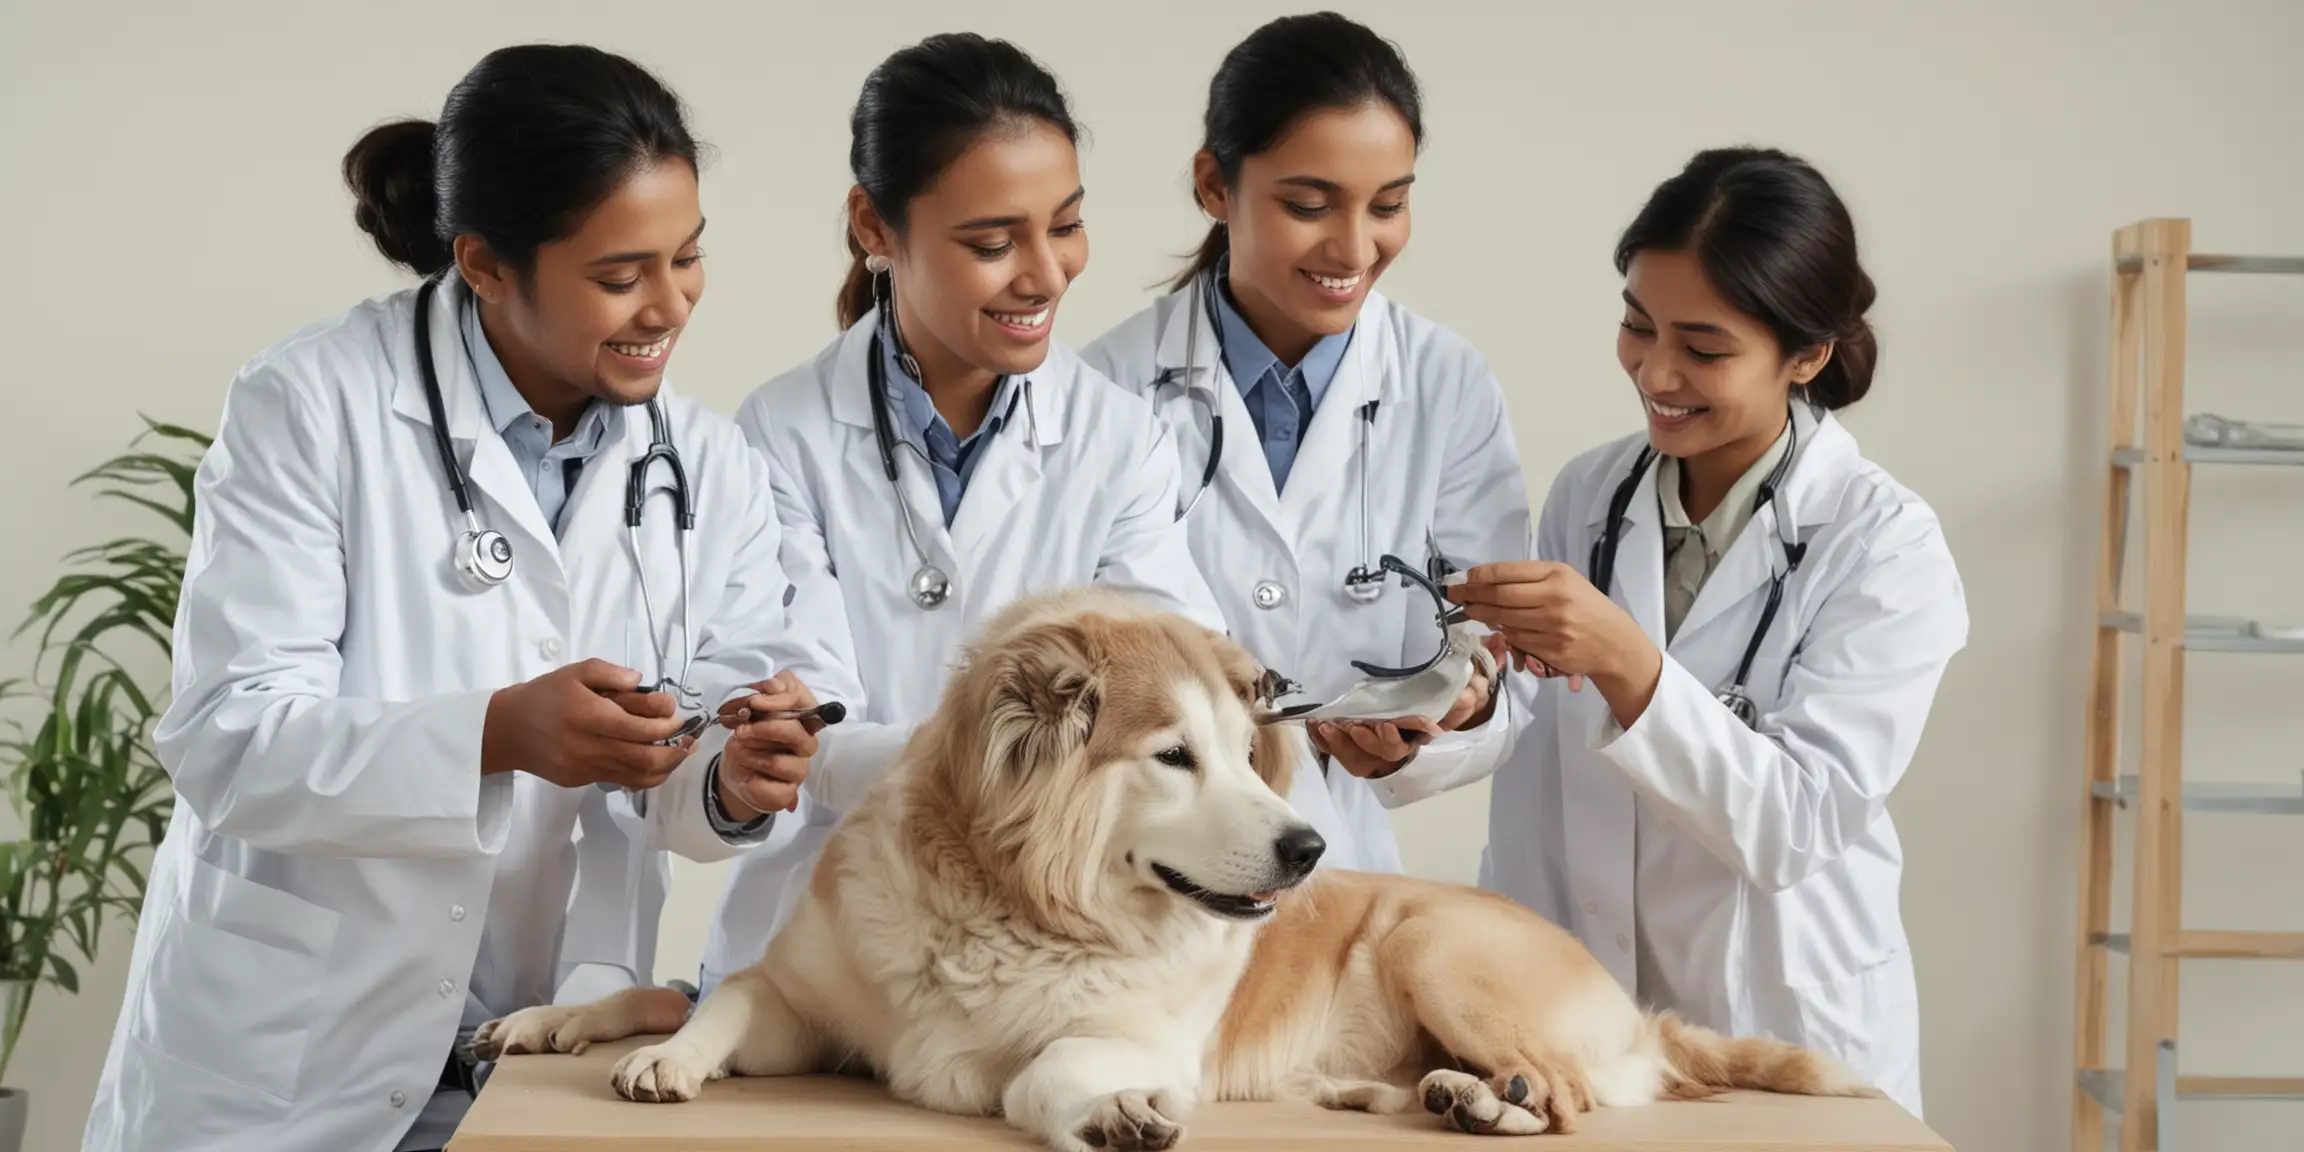 Indian, African, and Asian Veterinarians examining happy dog